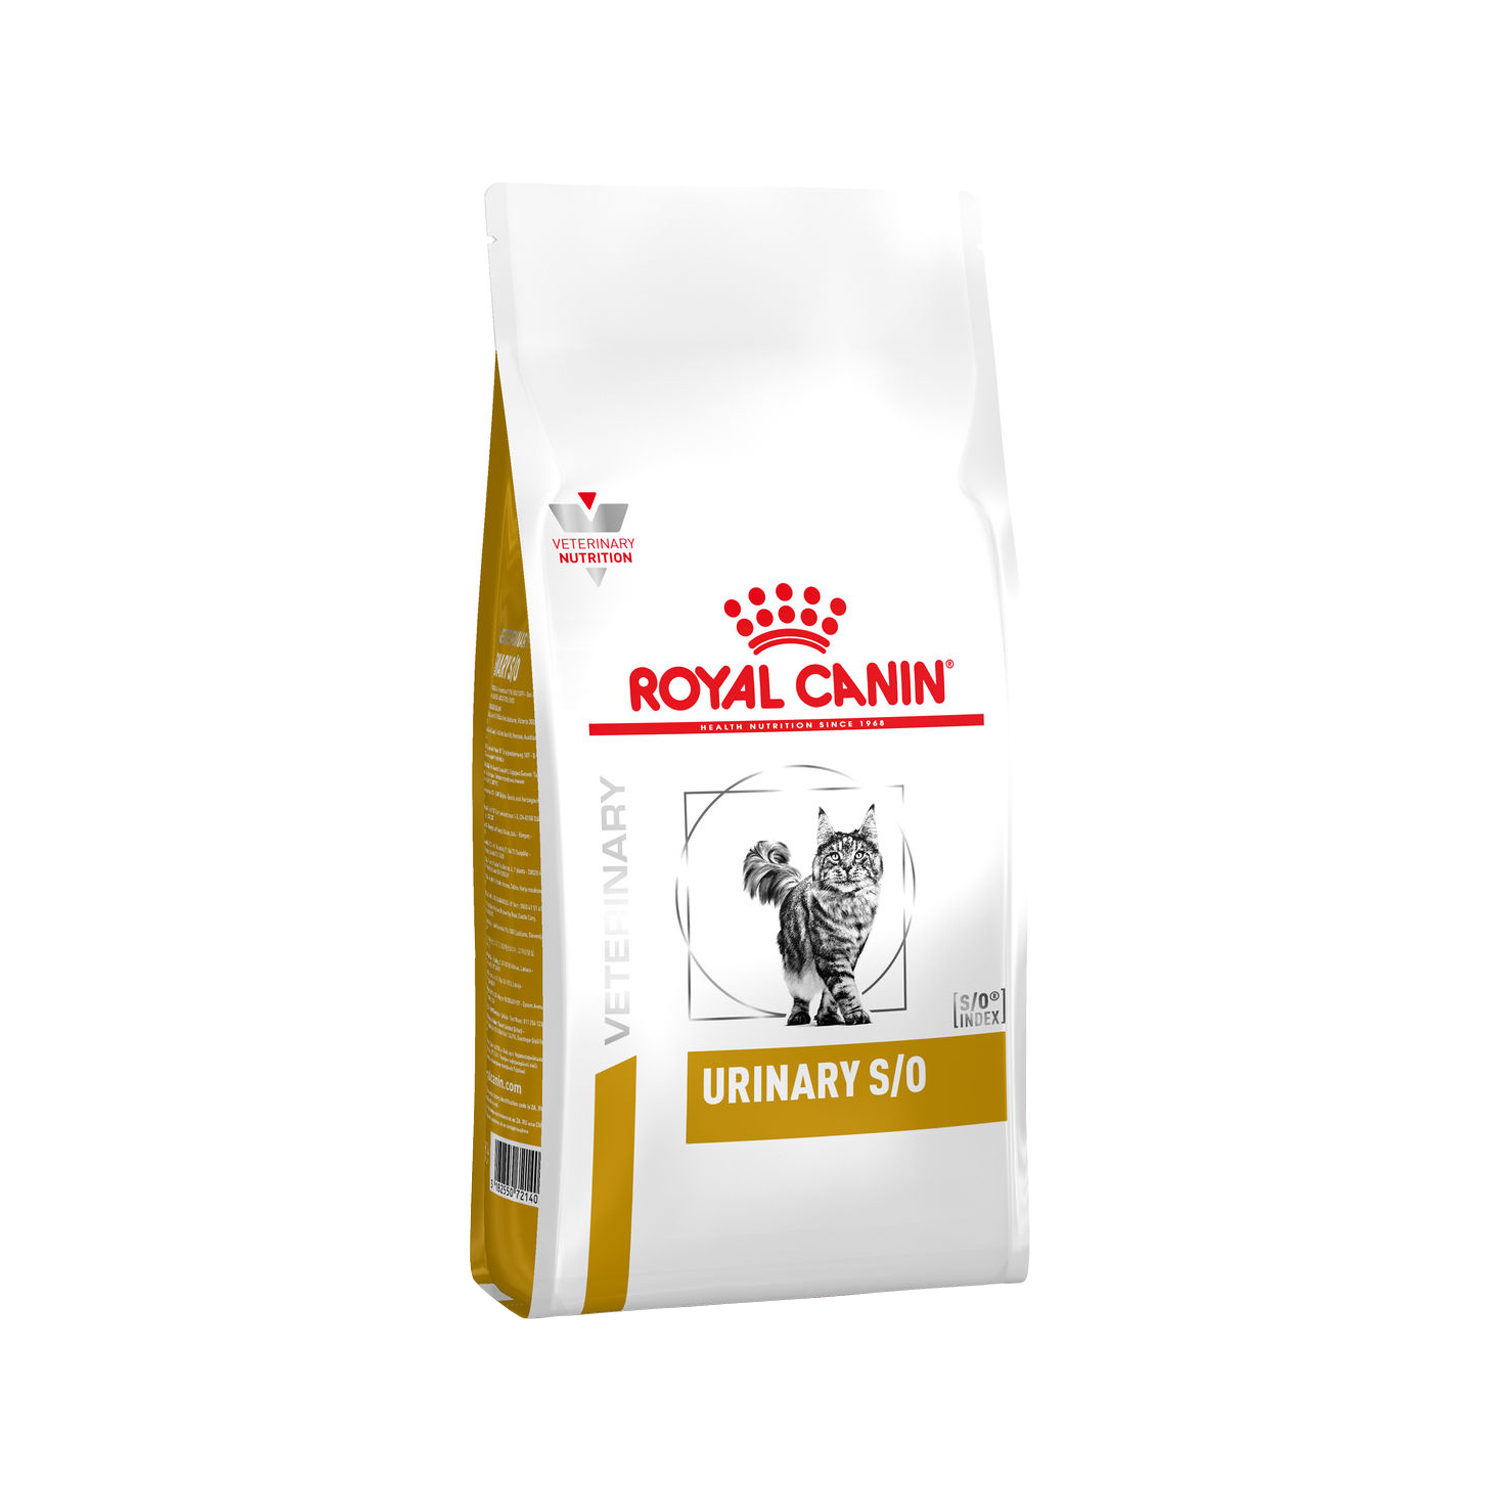 ROYAL CANIN Cat Urinary, 1er Pack (1 x 3.5 kg)